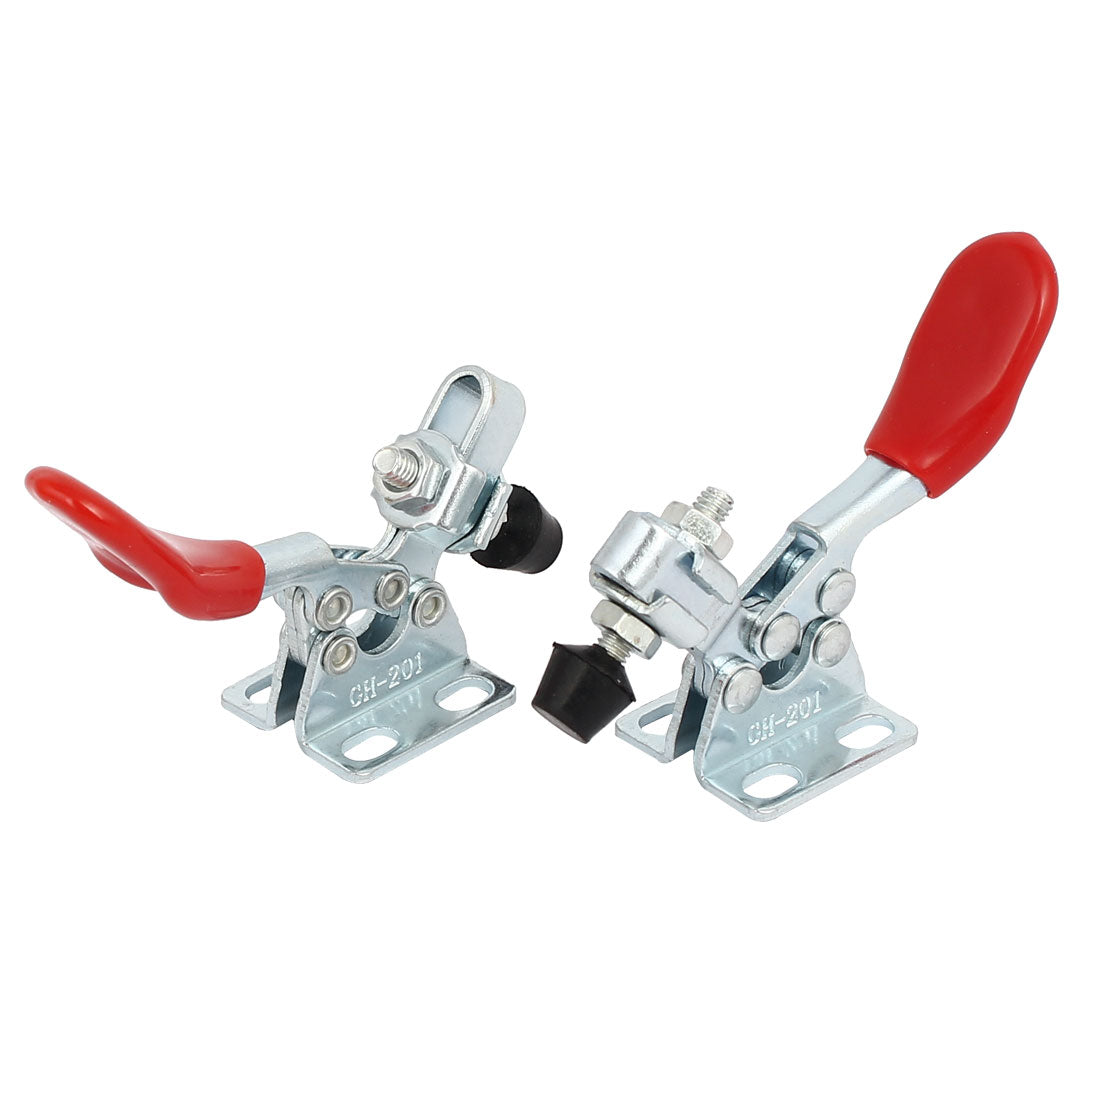 Uxcell Uxcell GH-201 27Kg Holding Capacity Horizontal Flanged Base Toggle Clamps 6pcs